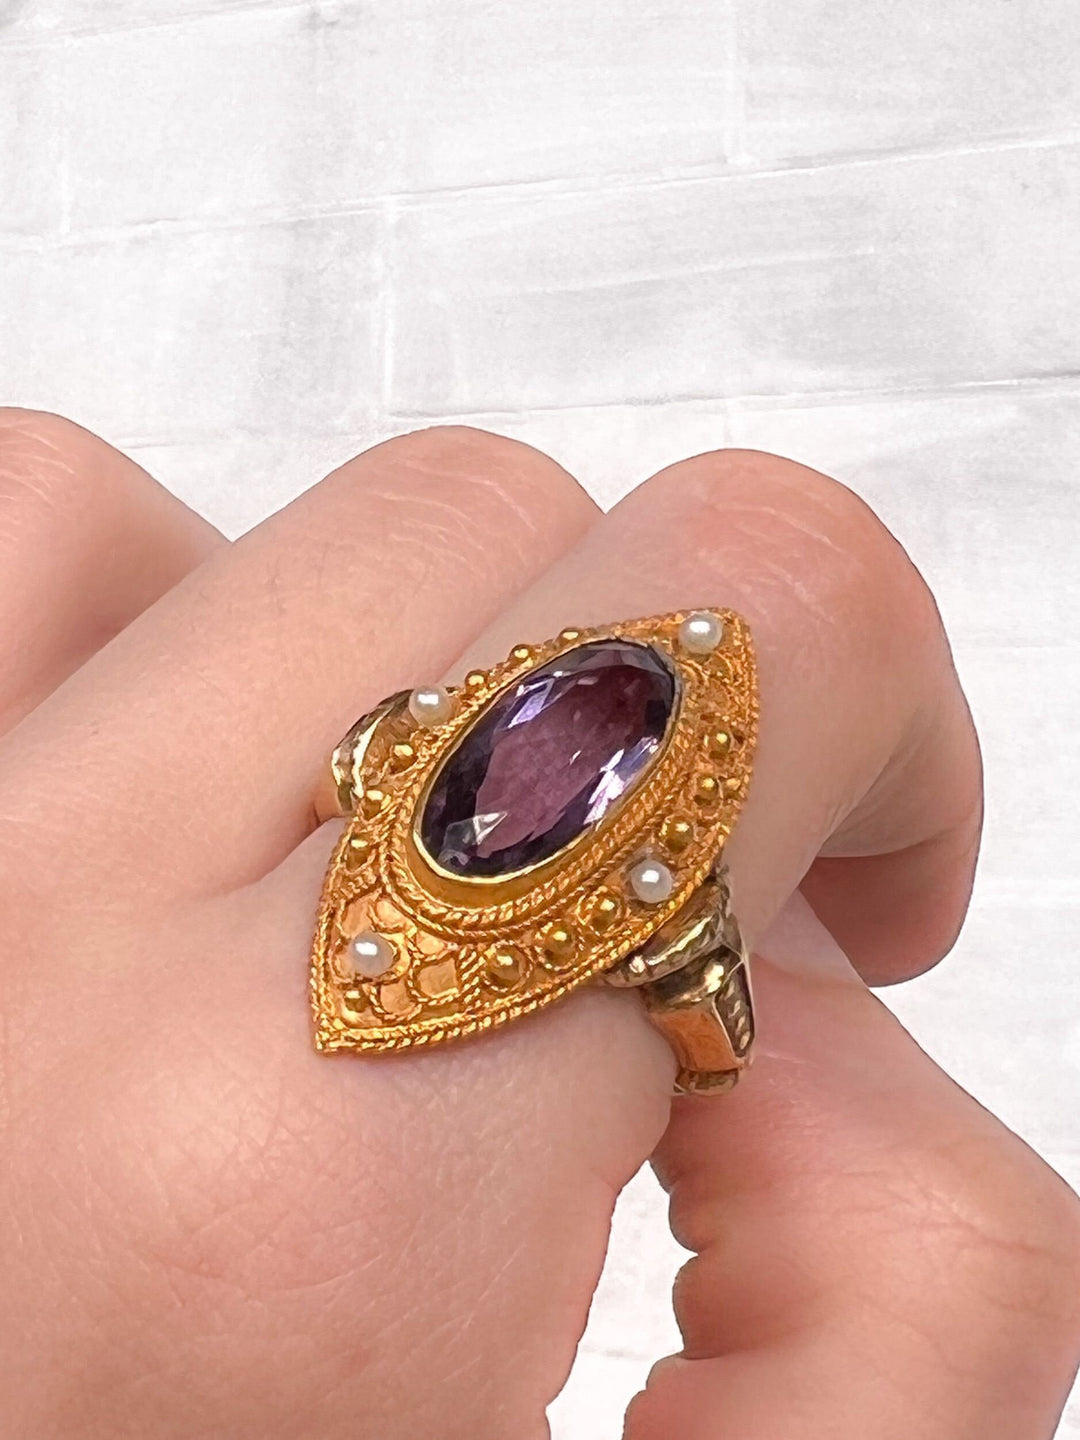 Sumptuous Victorian Archeological Revival Ring